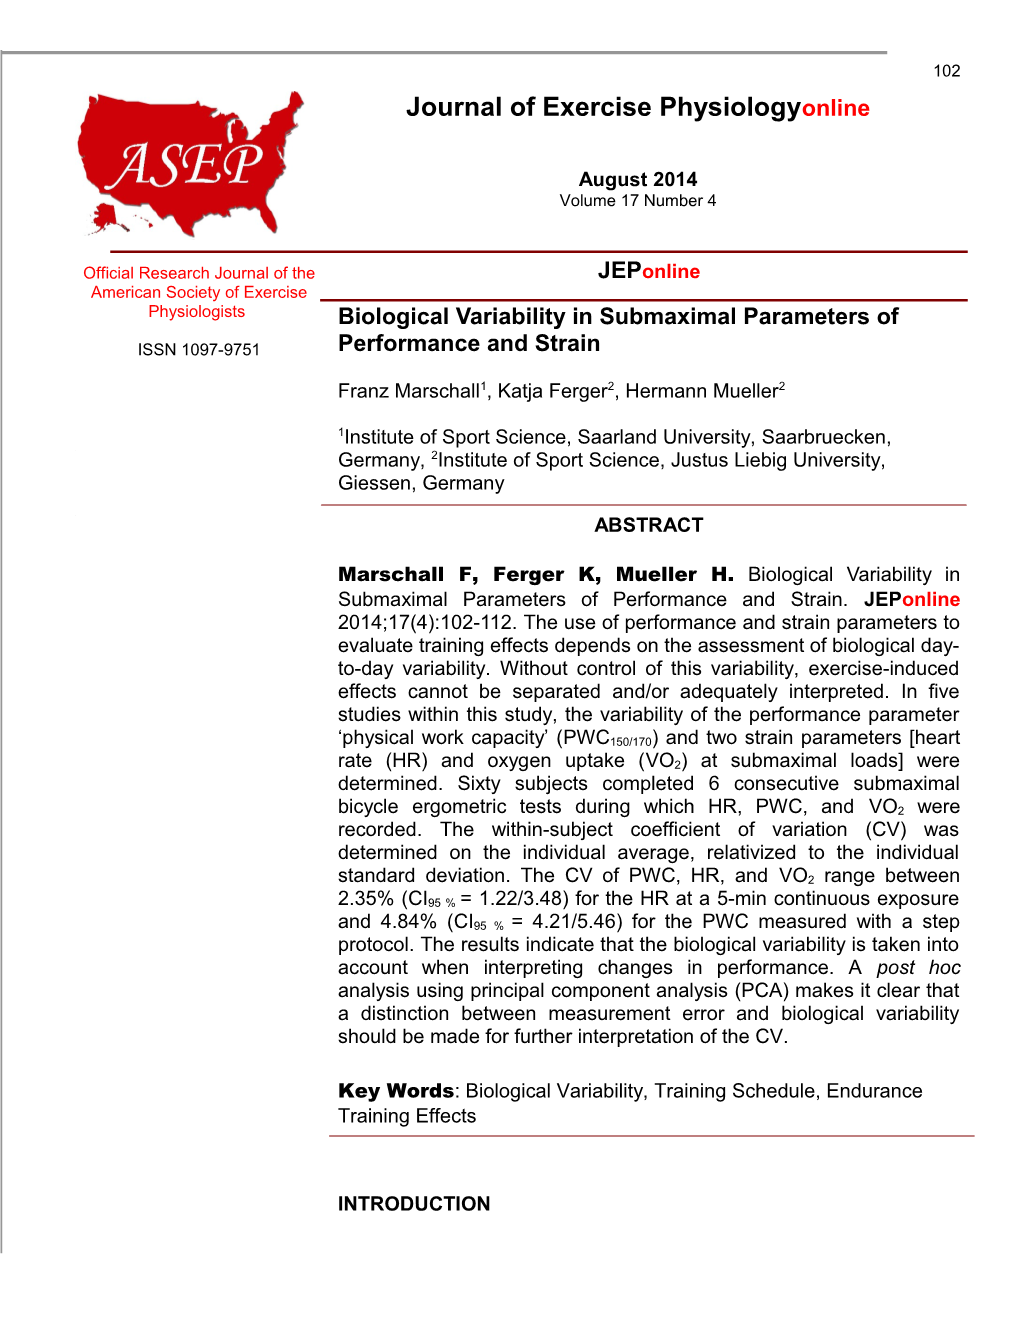 Biological Variability in Submaximal Parameters of Performance and Strain